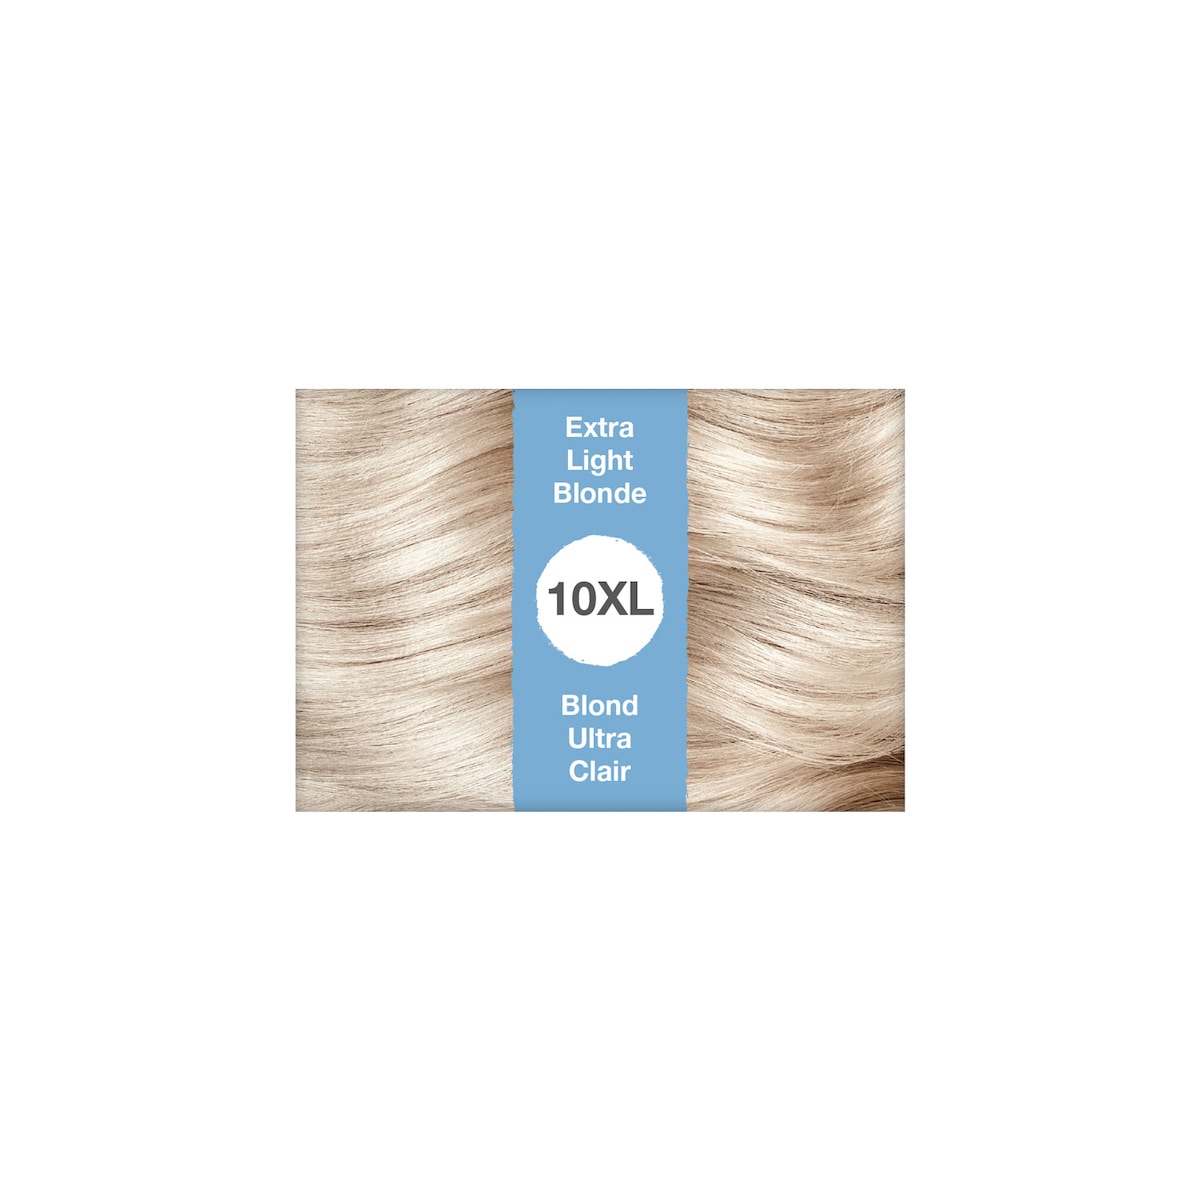 Tints of Nature 10XL Extra Light Blonde Permanent Hair Colour 130ml